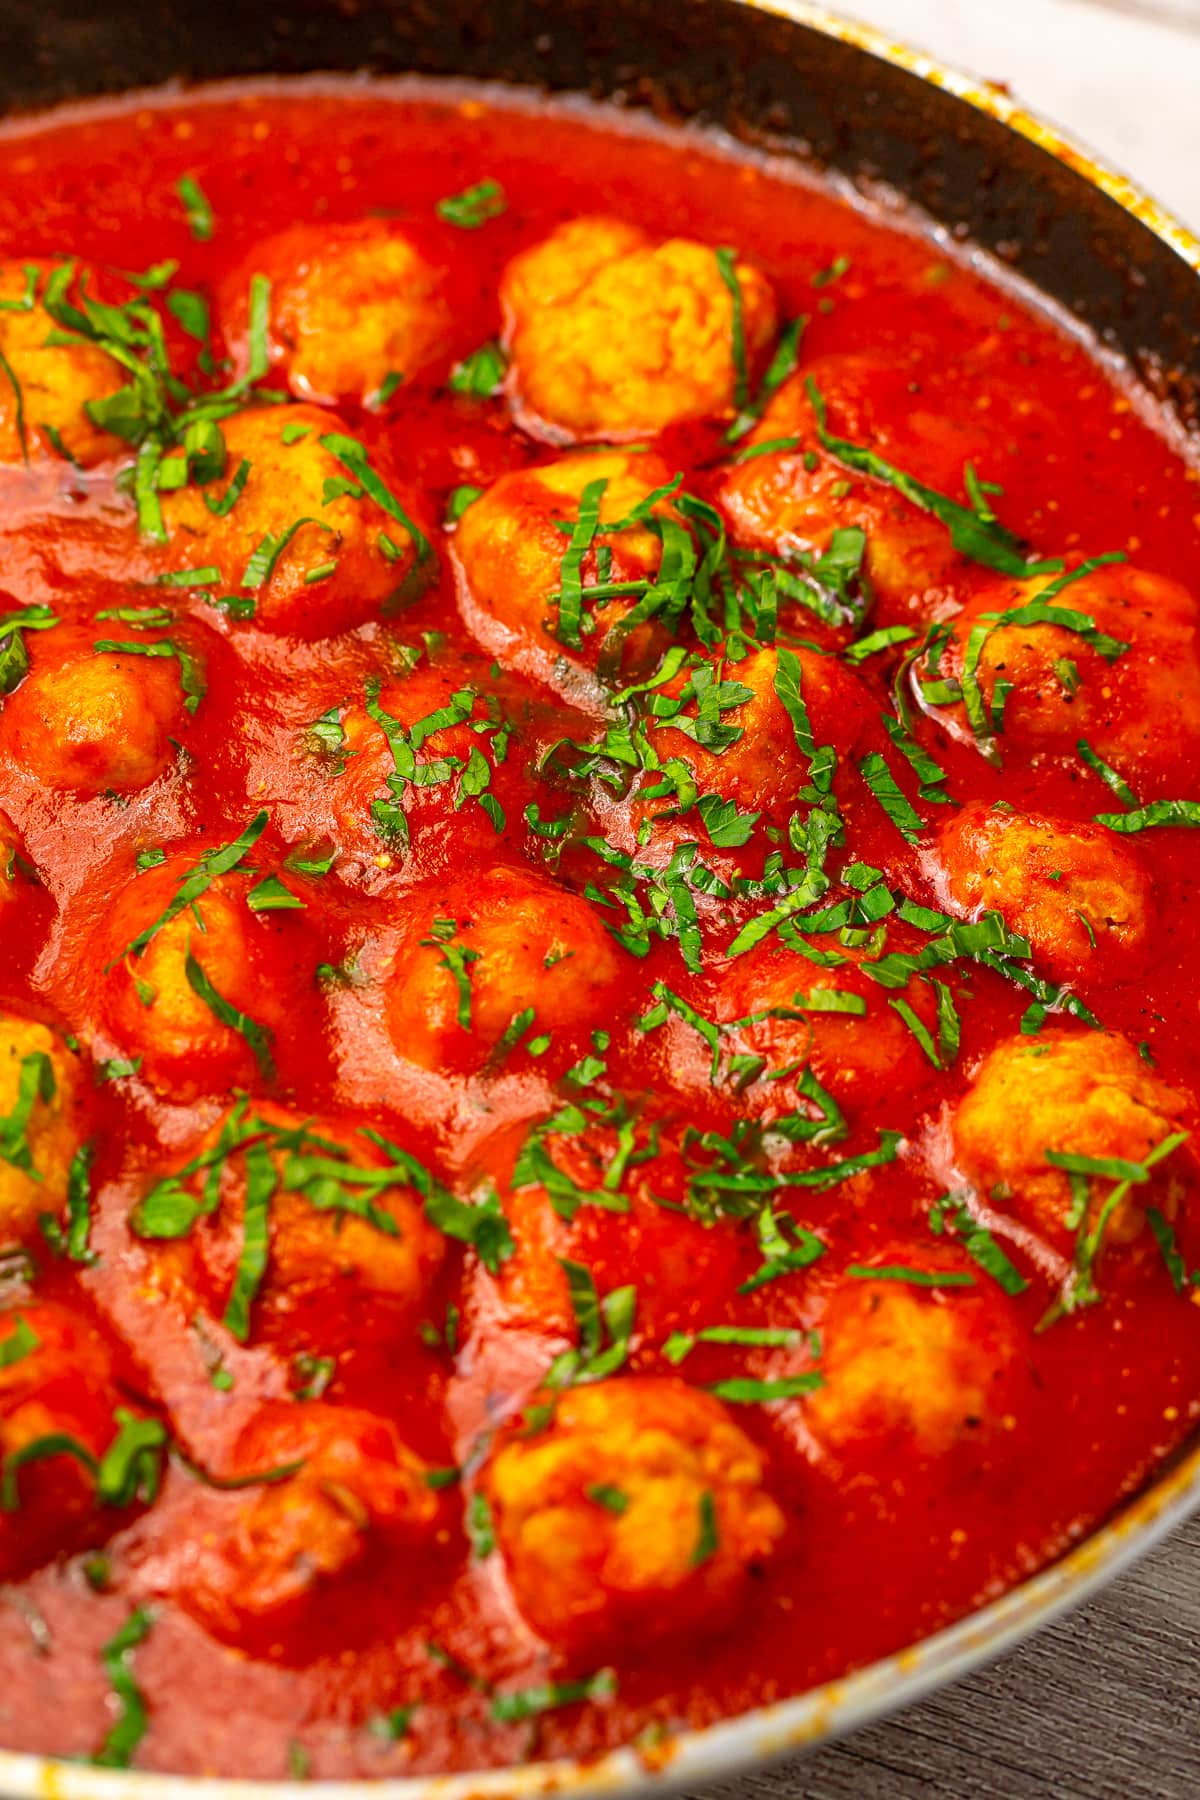 Skillet pan with chicken meatballs in tomato sauce.